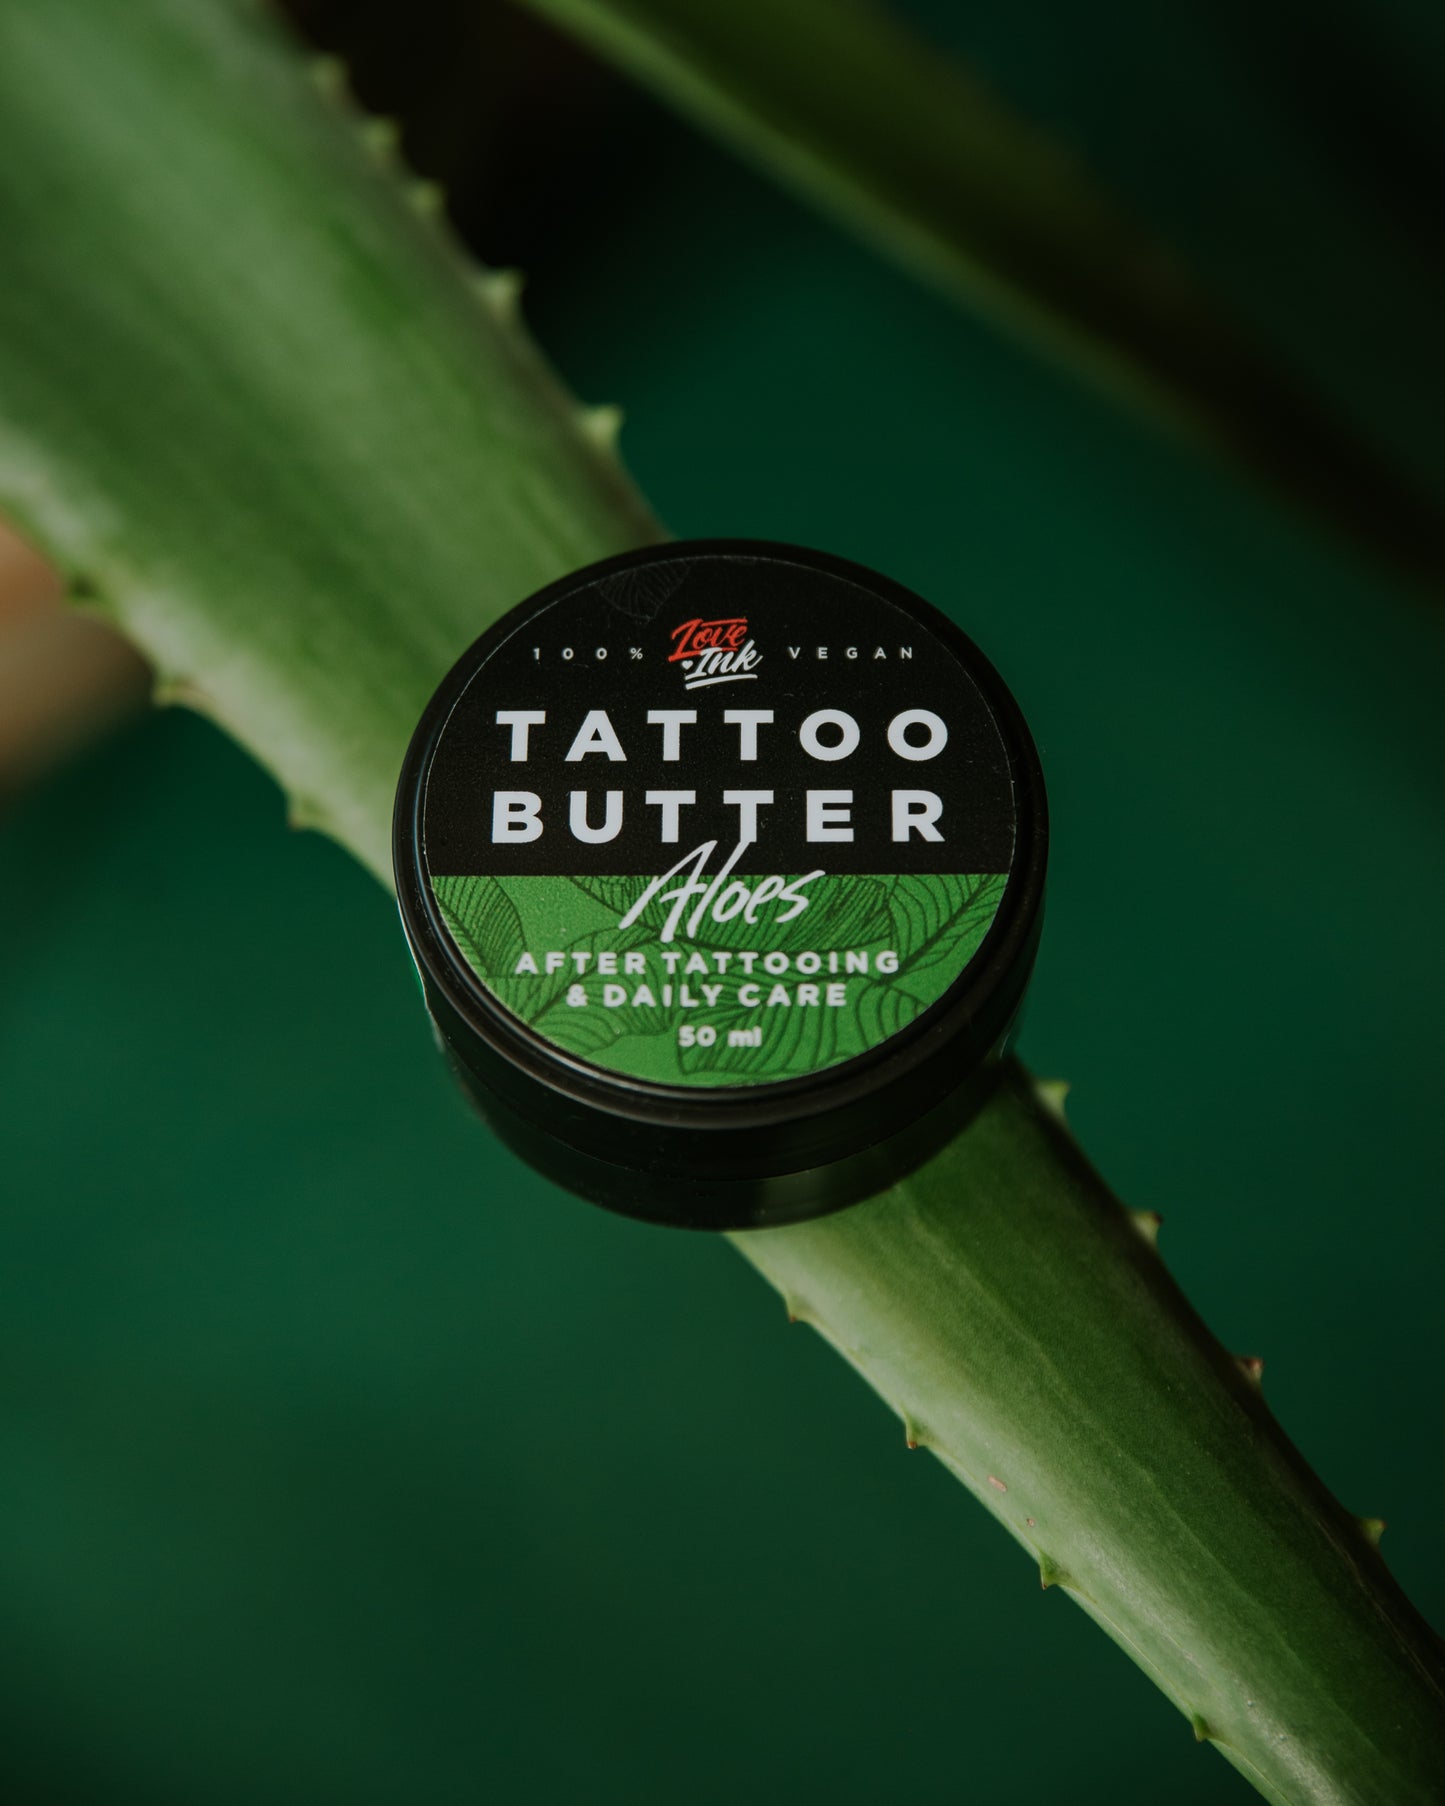 Tin of Love Ink Tattoo Butter Aloe, 50 ml, placed on an aloe leaf, with a green background.